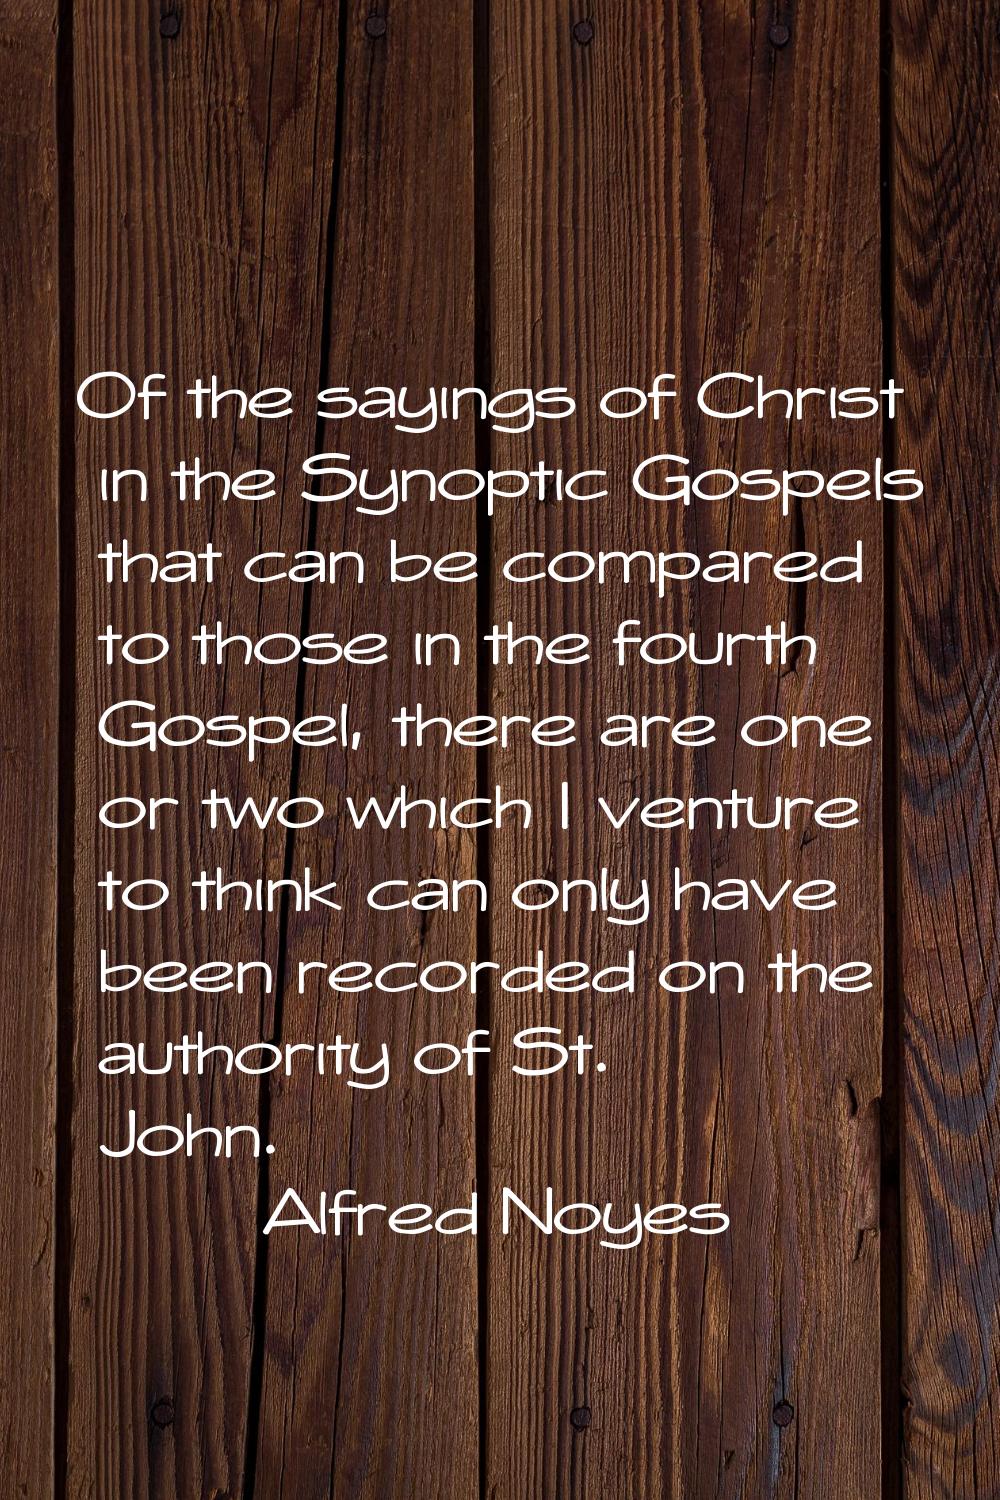 Of the sayings of Christ in the Synoptic Gospels that can be compared to those in the fourth Gospel